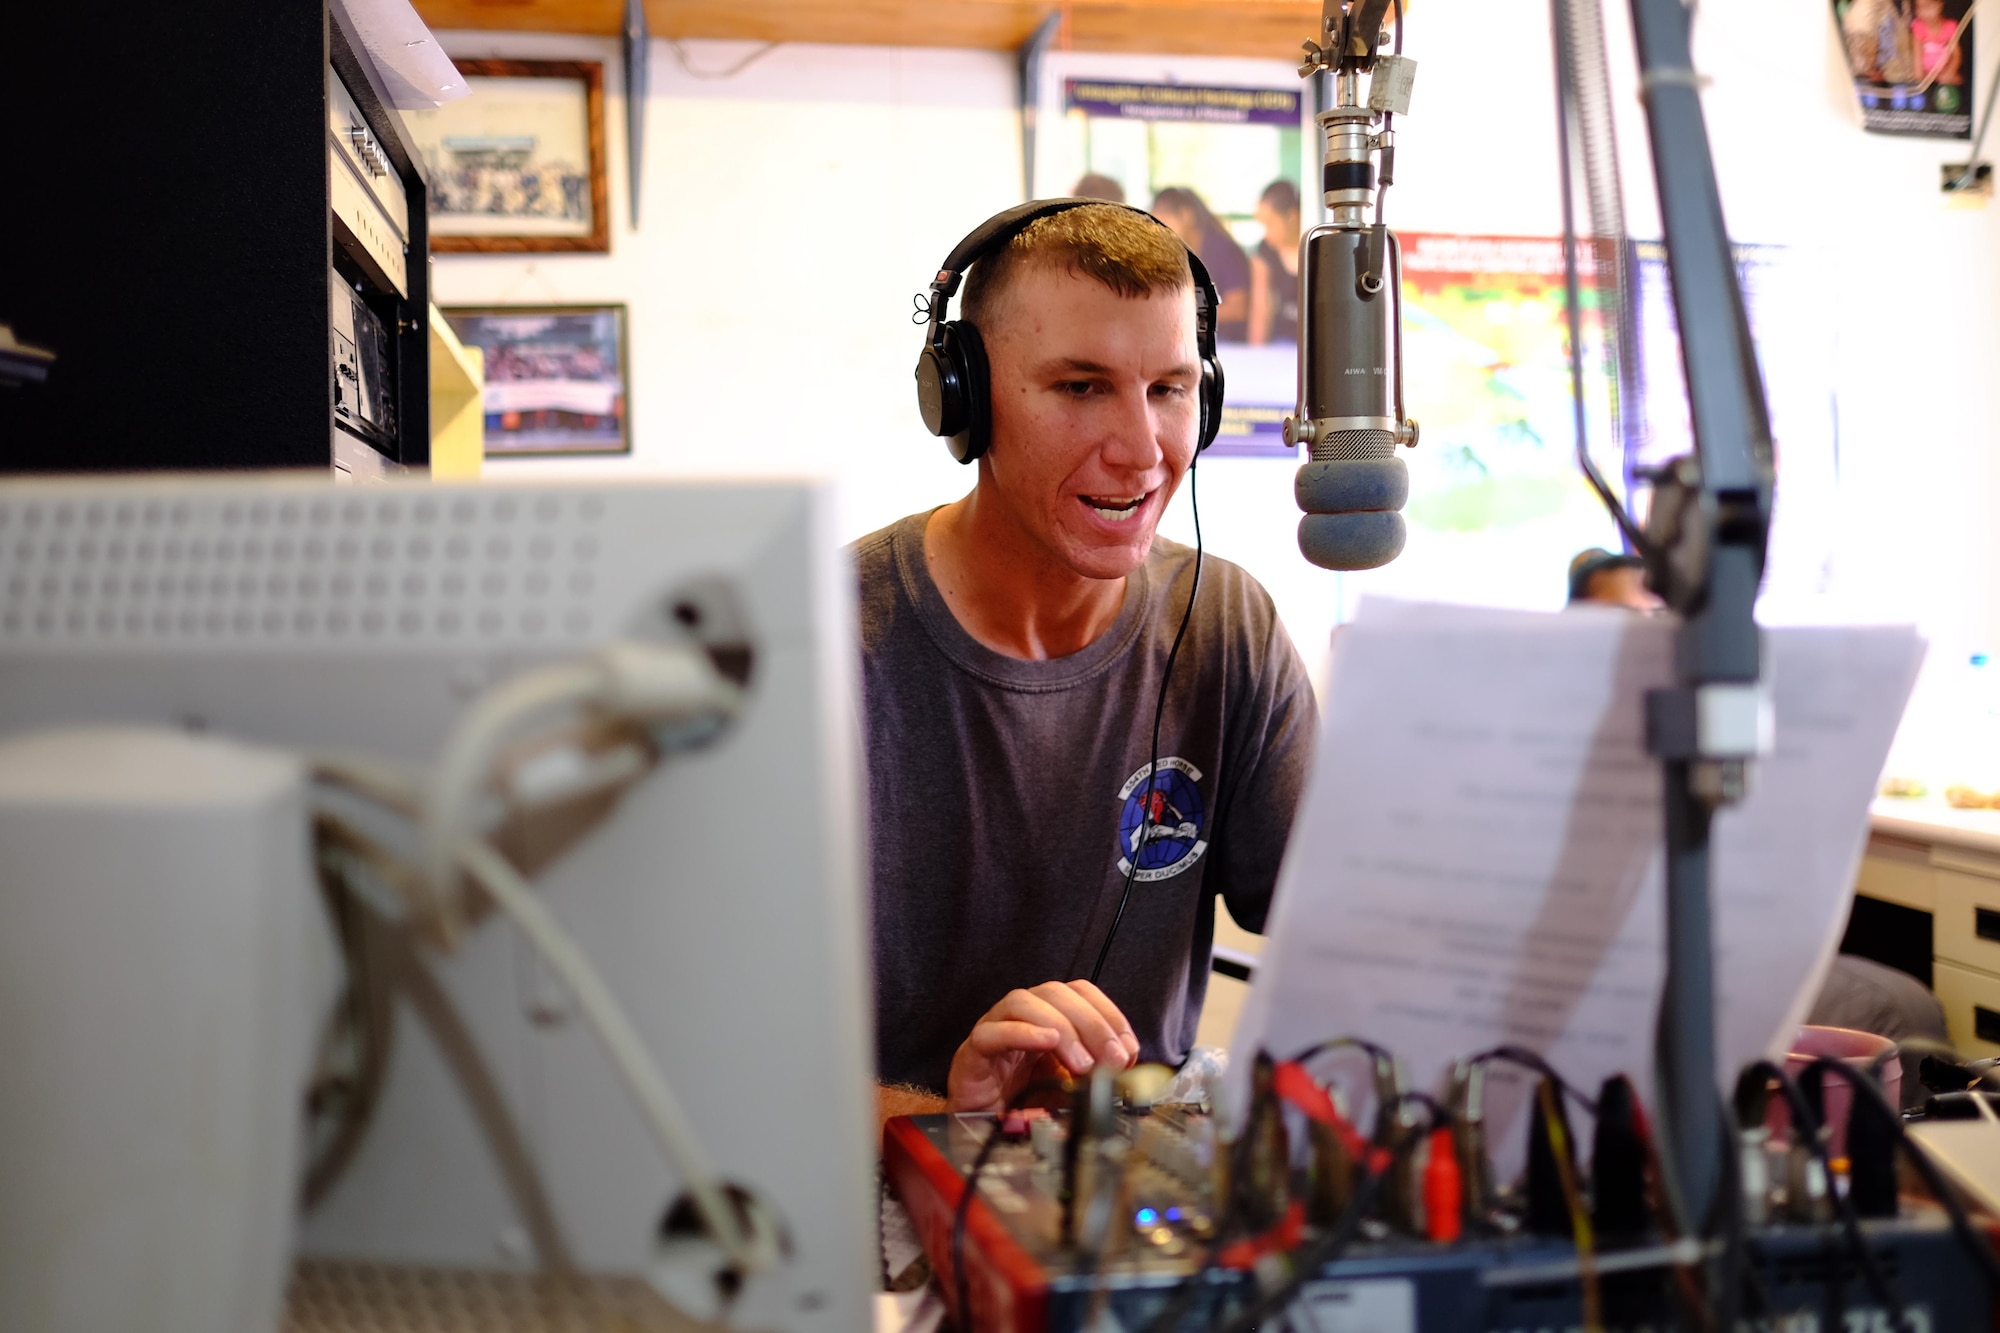 U.S. Air Force Senior Airman Lucian Root, Civil Action Team 554-01 structural journeyman from the 36th Civil Engineer Squadron at Andersen Air Force Base, Guam, speaks into the microphone during a radio show, Feb. 18, 2016. Root, along with other members of CAT 554-01, hosted a radio program every week informing listeners about current and completed projects, along with playing American music. (U.S. Air Force photo by Staff Sgt. Christopher Stoltz/Released)